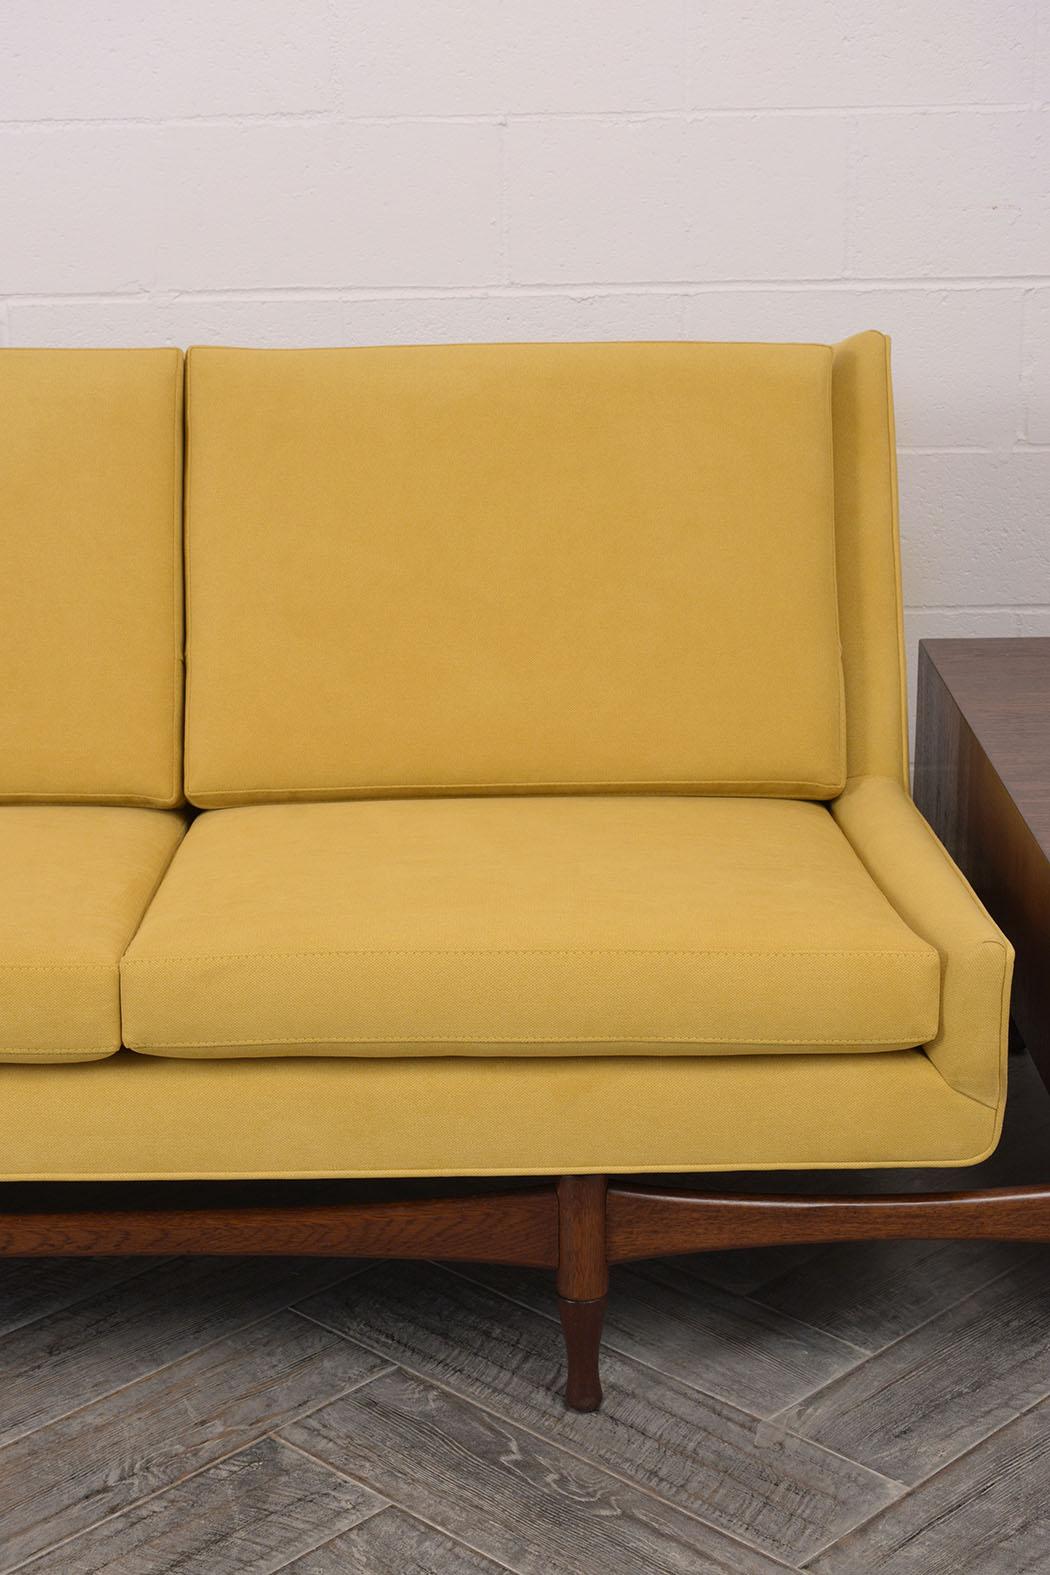 Lacquered Danish Executive Modern Sofa with Side Tables